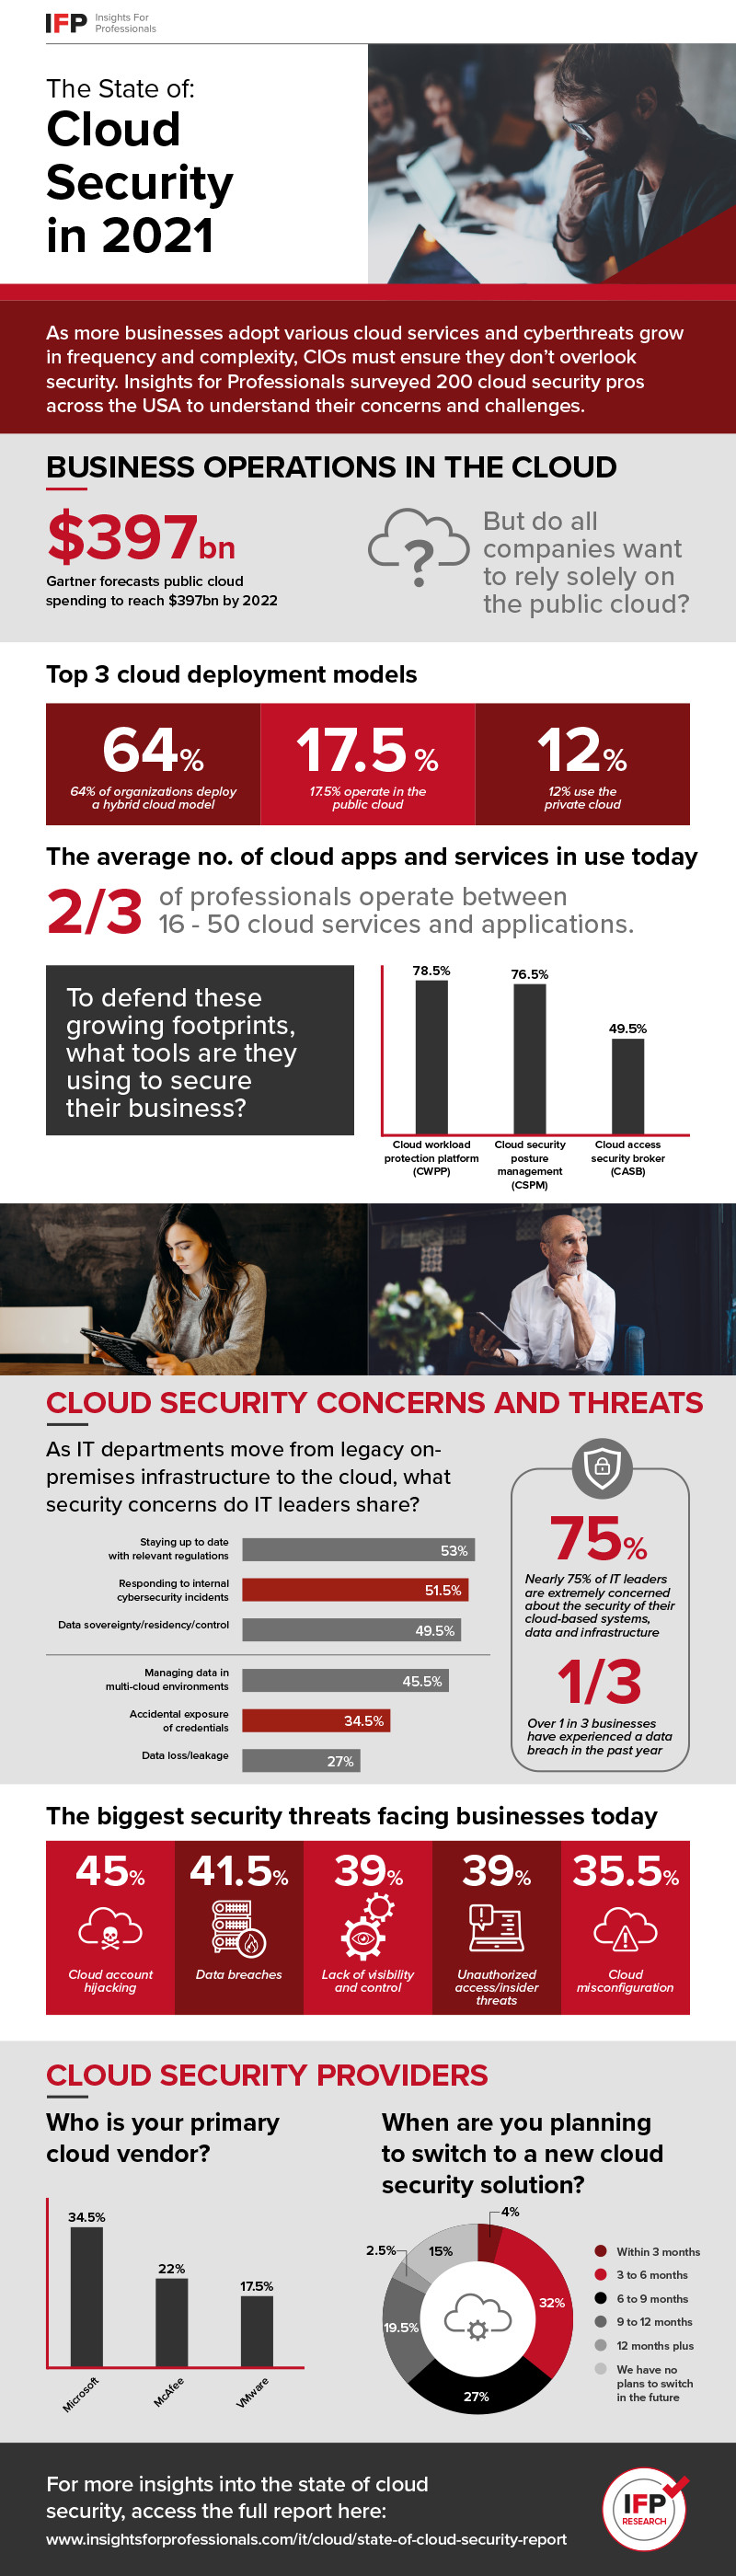 Insights for Professionals reveals key statistics from the state of cloud security report in 2021